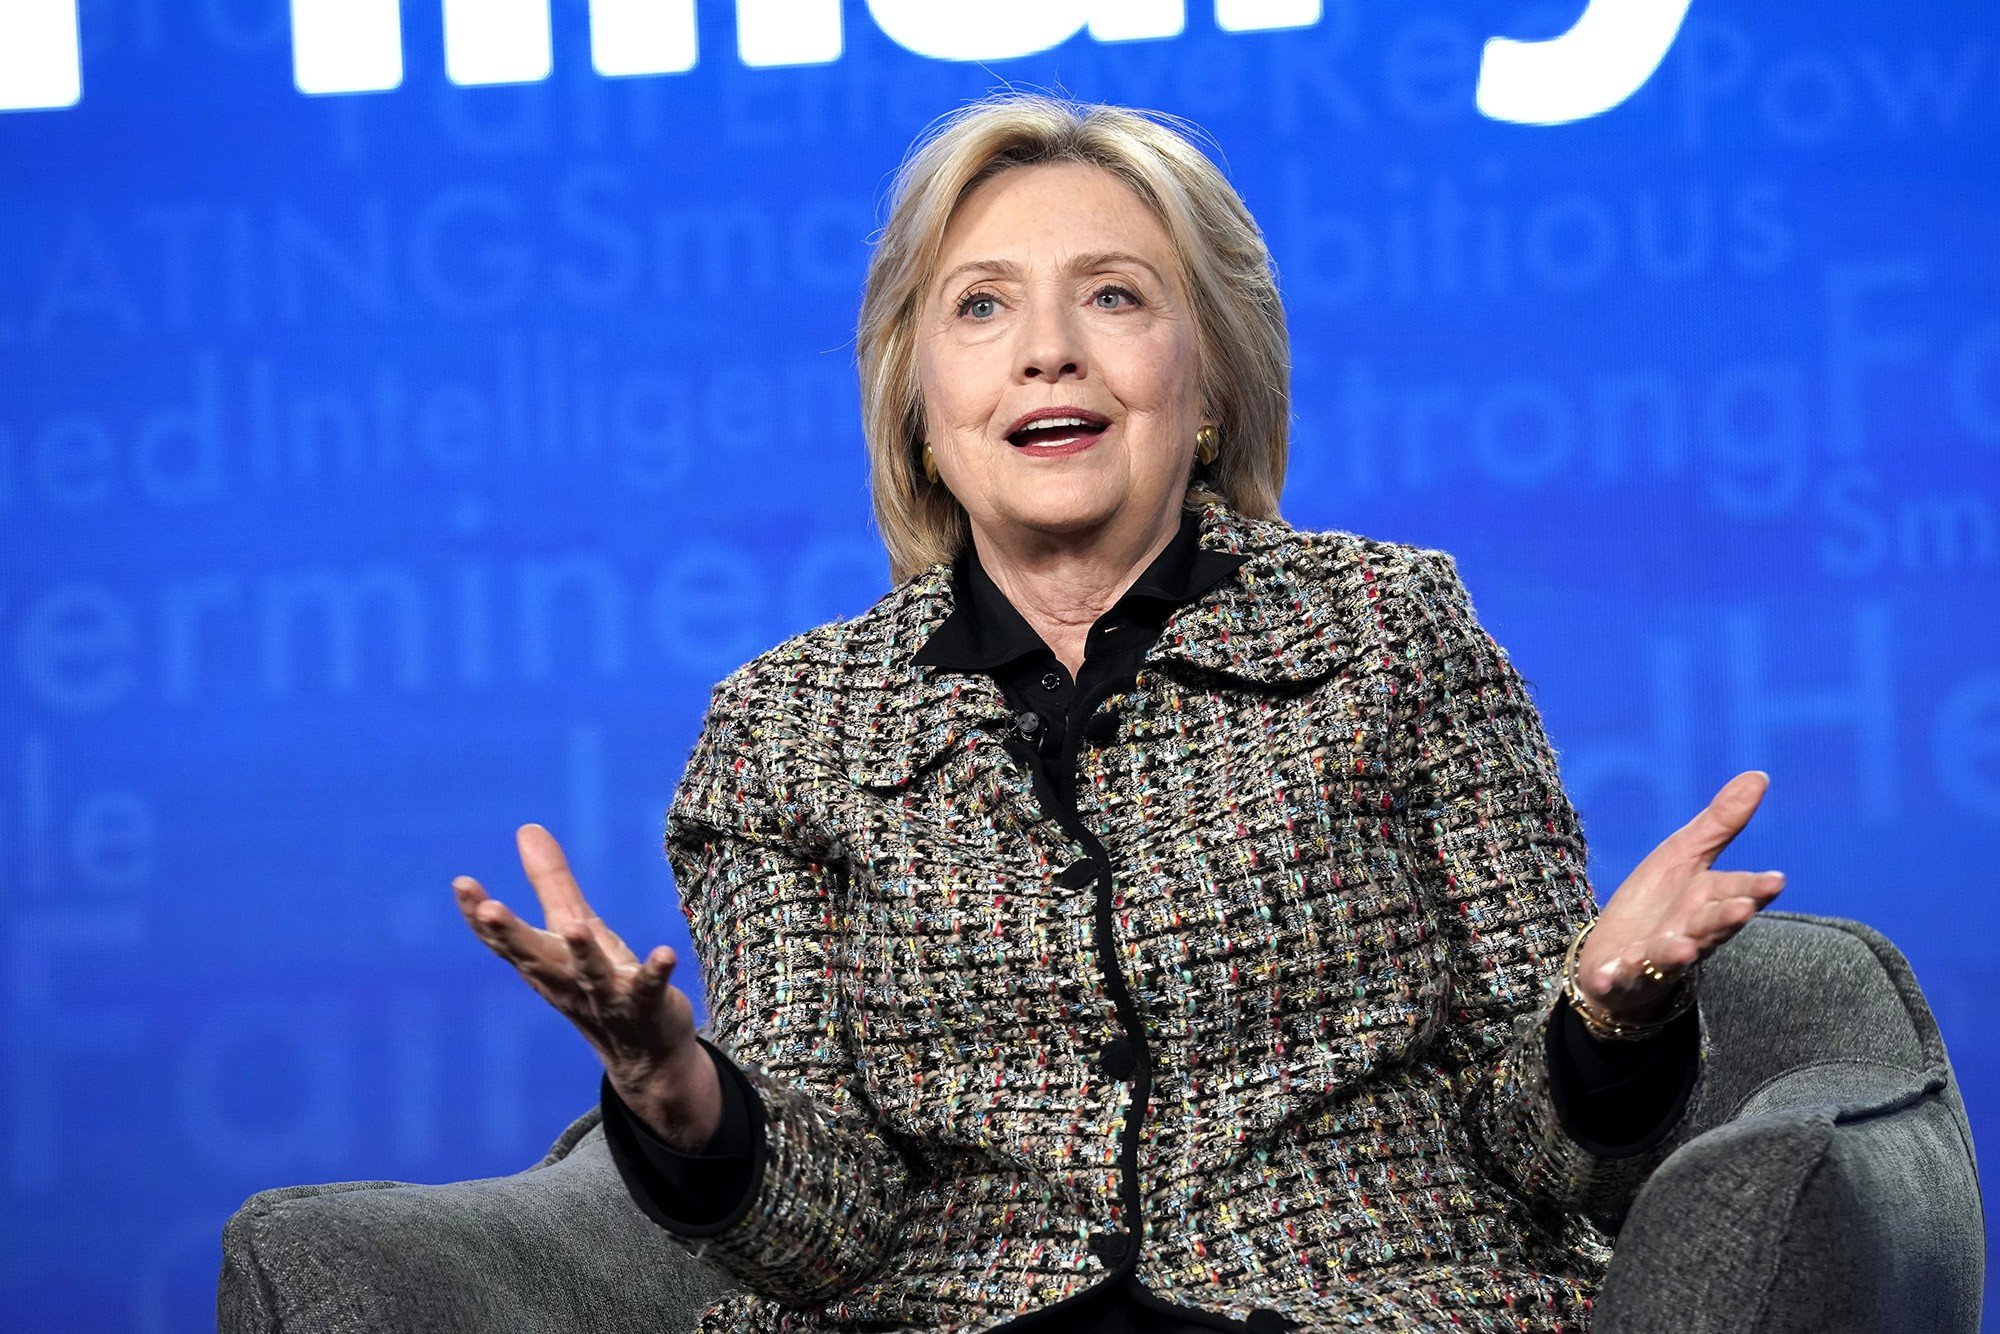 Hillary Clinton, speaking during the Hulu Panel at Winter TCA 2020 in Pasadena, California, on Friday. Photo: TNS